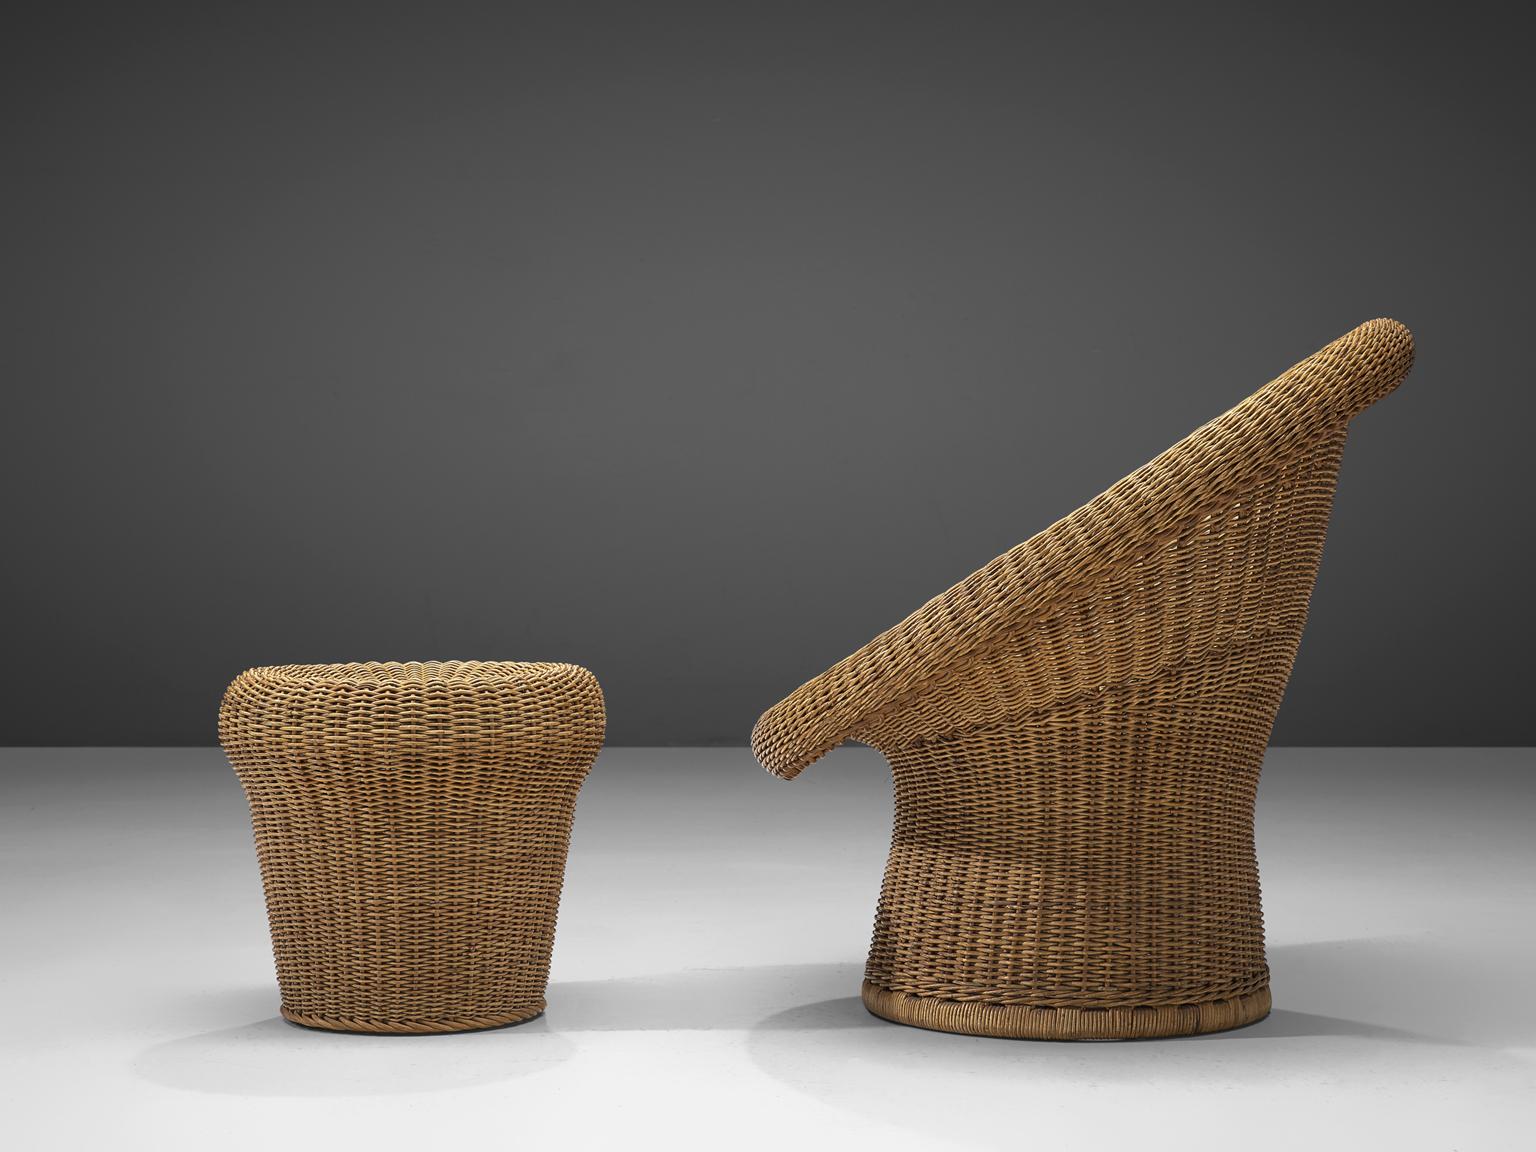 Egon Eiermann, lounge chair with ottoman E 10, wicker, Germany, design 1952, production 1960s 

Already in the 1940s Eiermann had woven wicker for covering couches and armchairs, but also used it as an architectural element in outdoor doors and